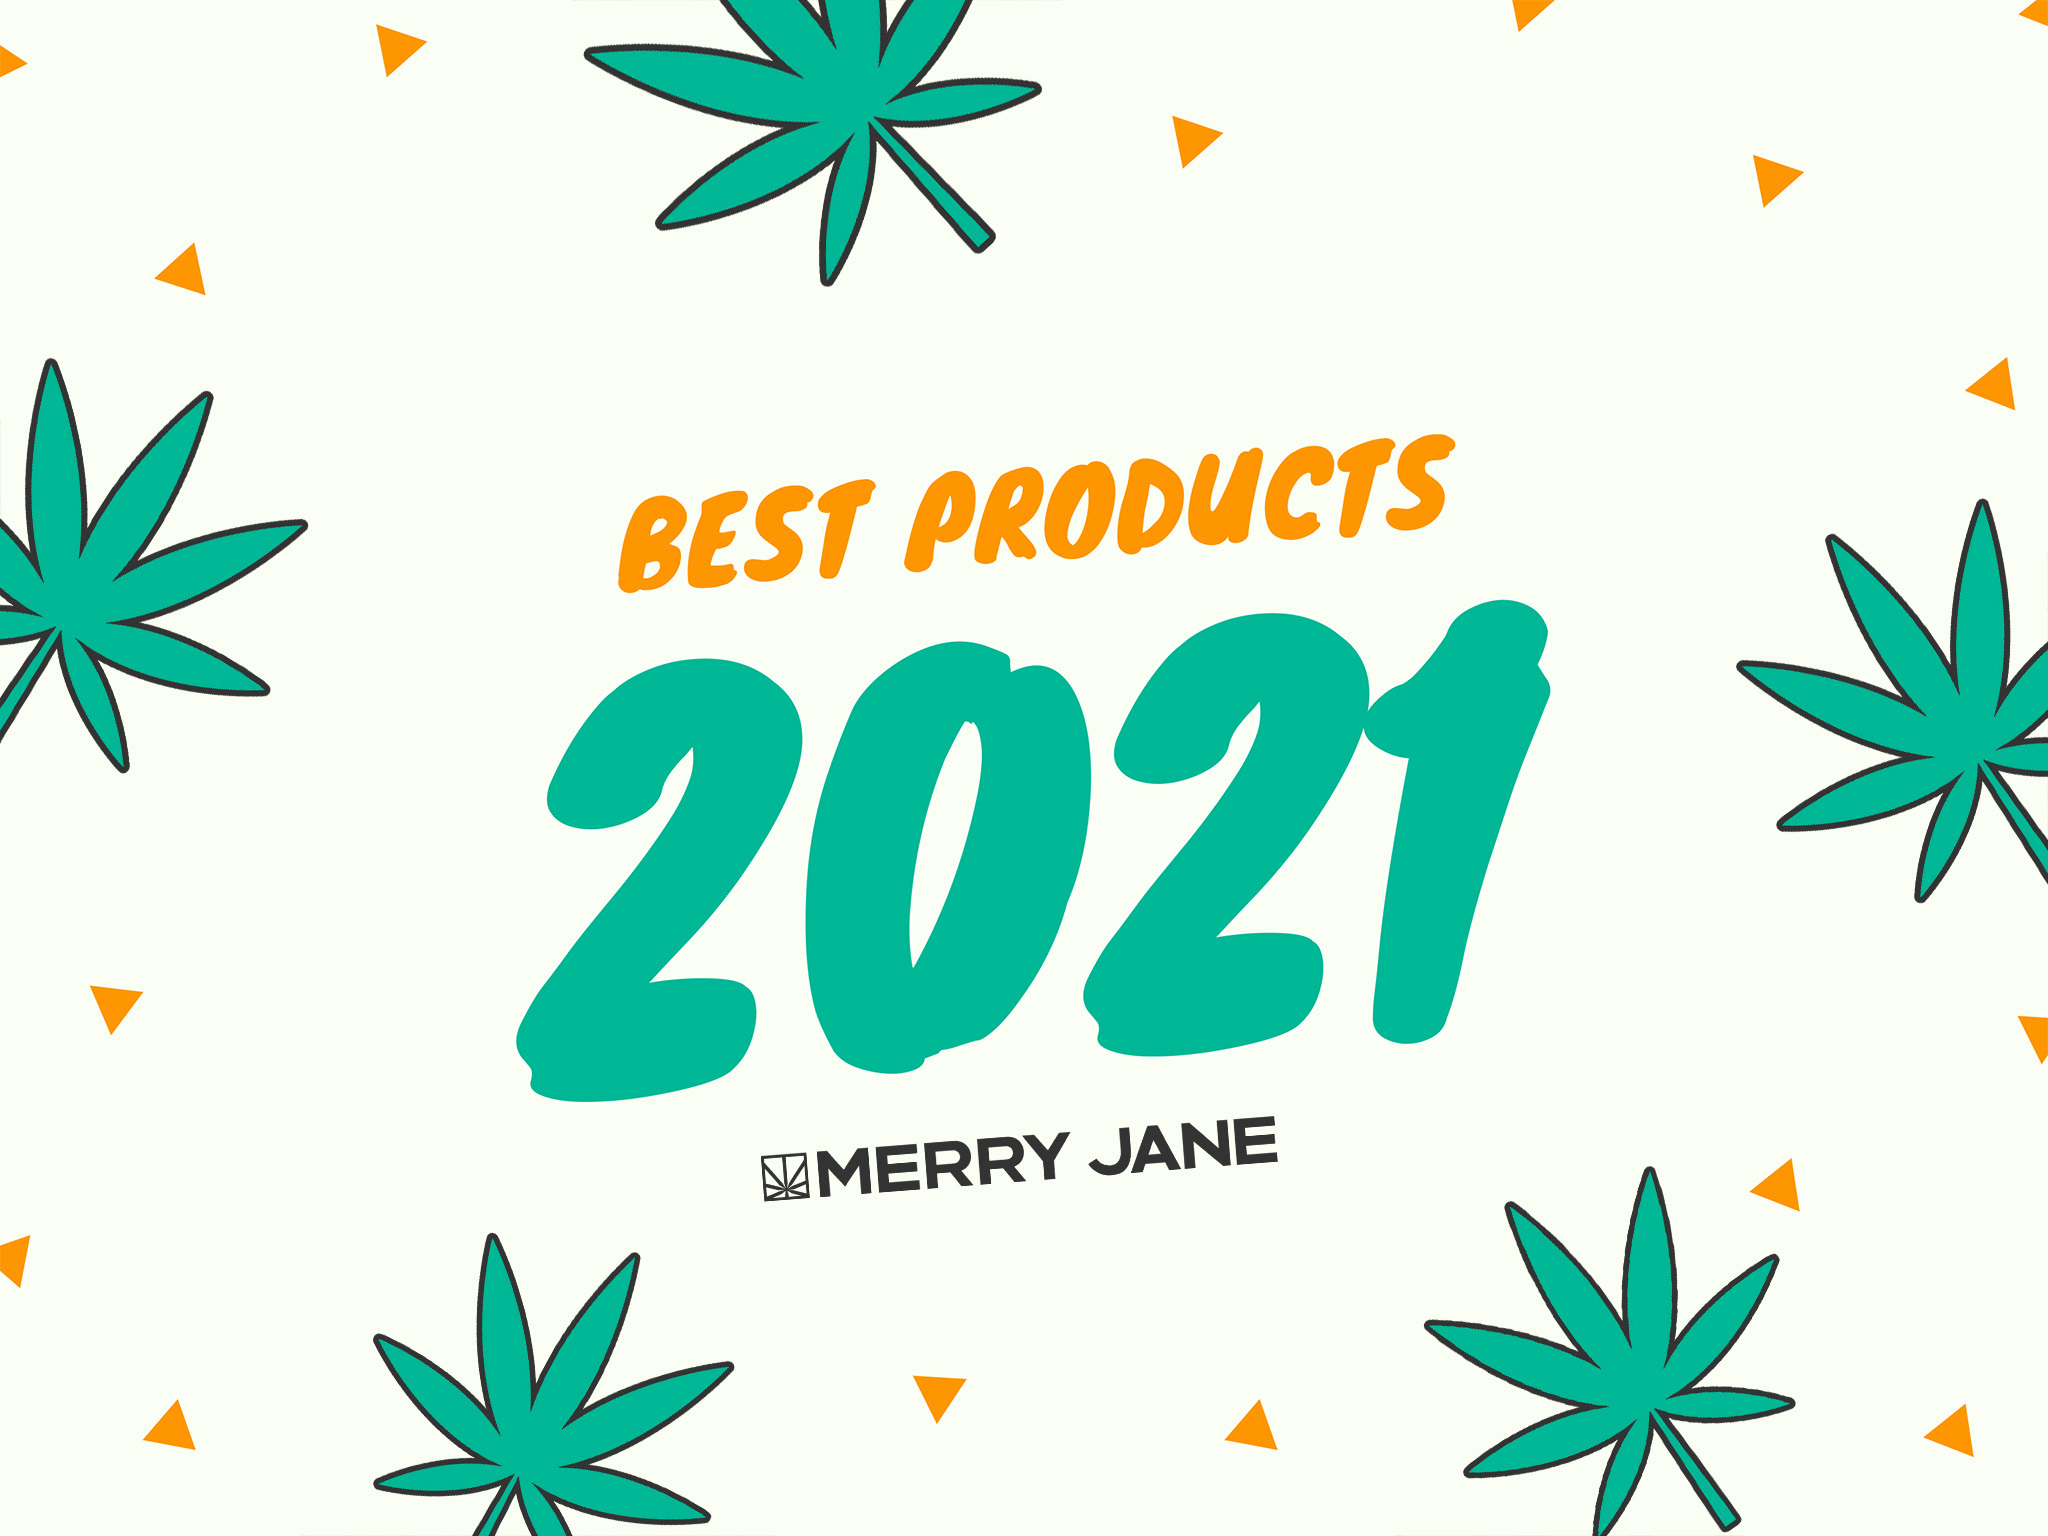 Here Are the Best Products and Services the Weed Industry Has to Offer in 2021